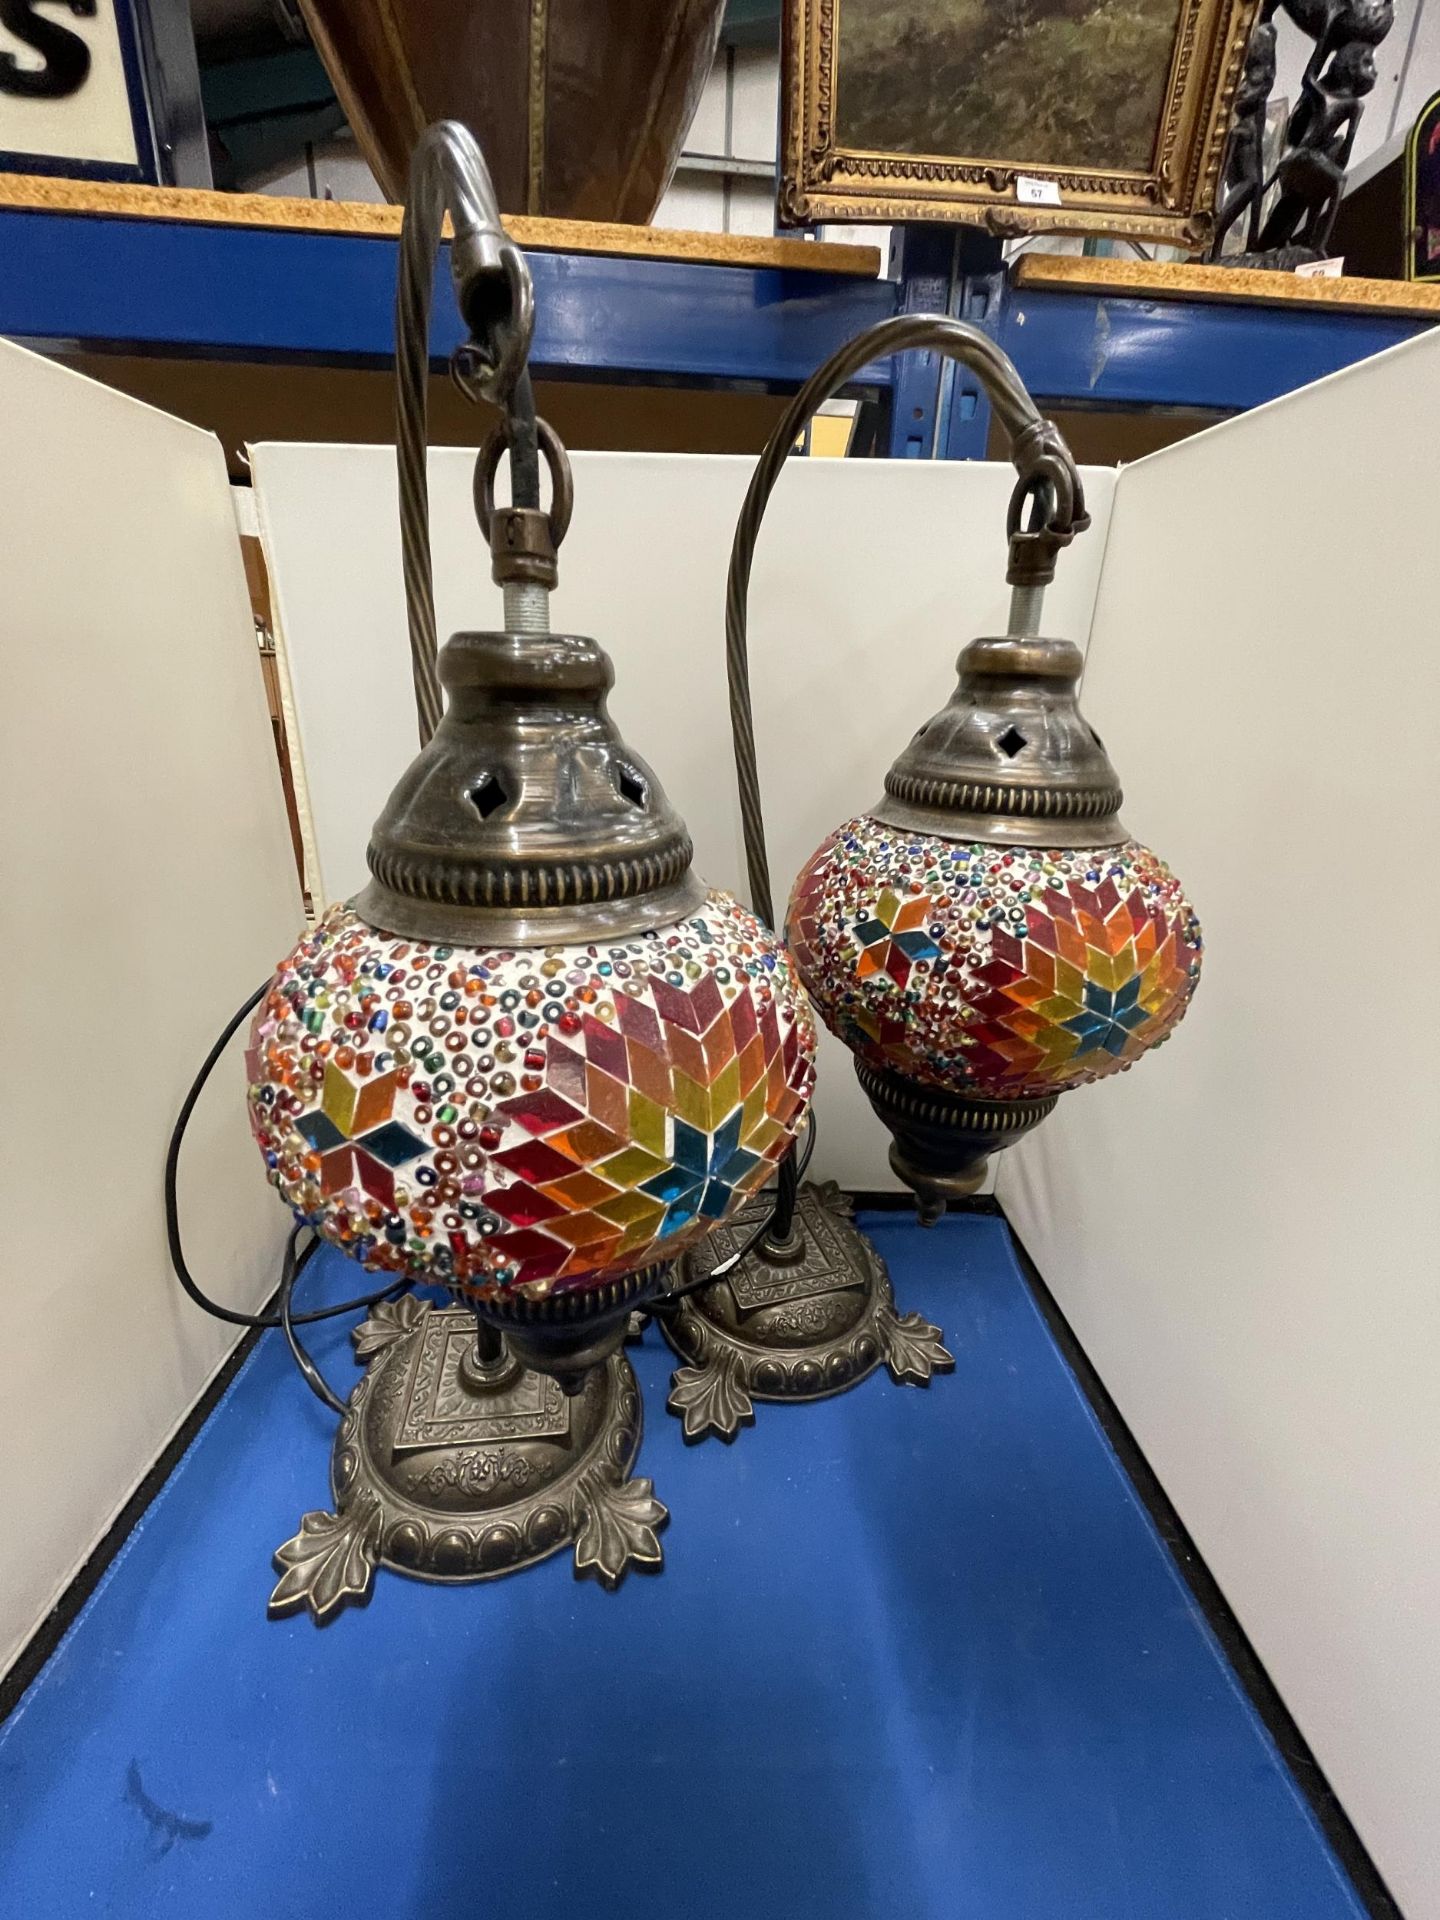 A PAIR OF MOROCCAN STYLE TABLE LAMPS WITH DECORATIVE GLASS SHADES